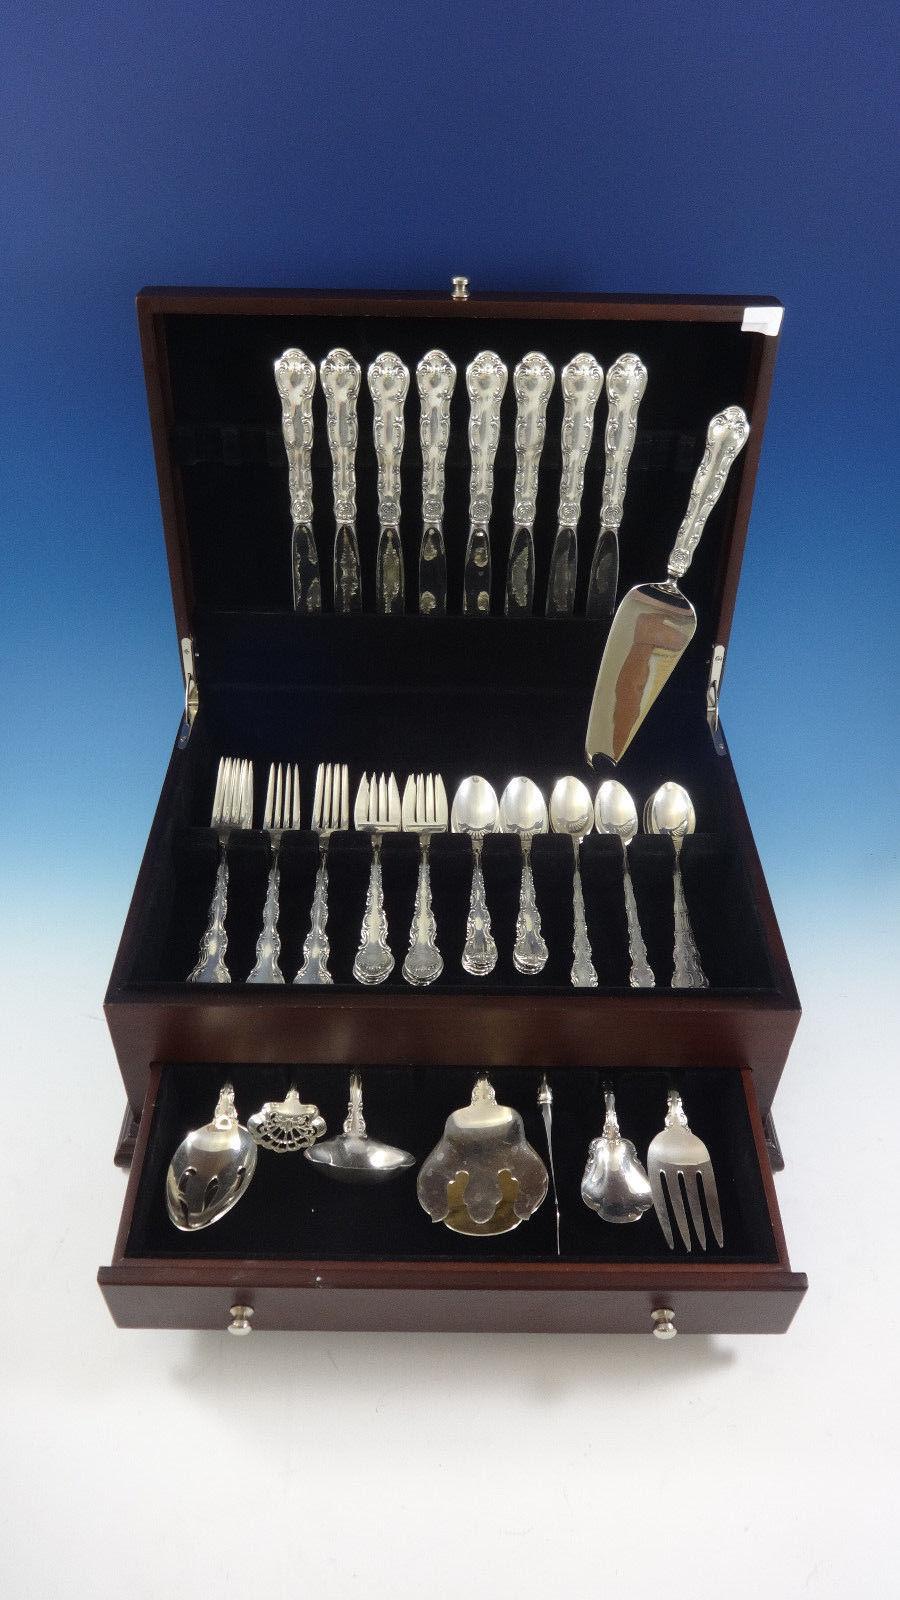 Strasbourg by Gorham sterling silver place size flatware set - 50 piece set. This set includes:

8 place size knives, 9 1/4